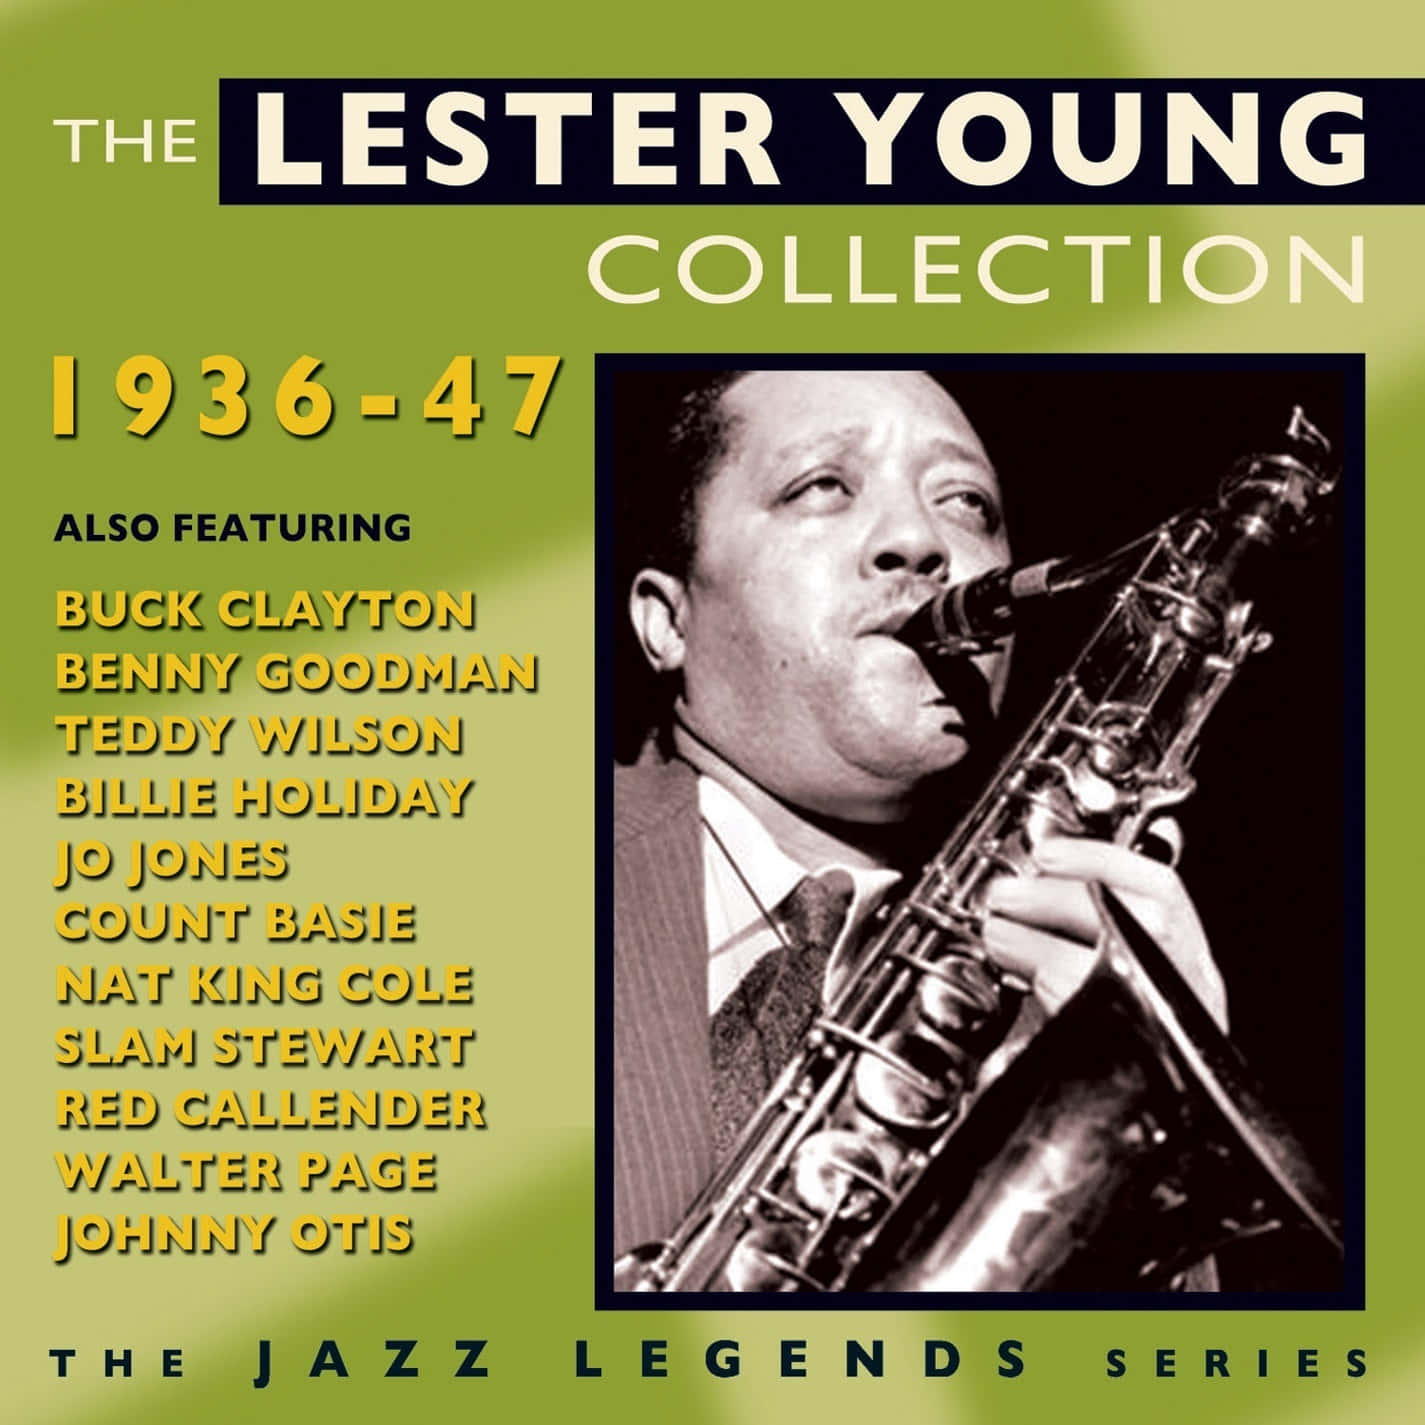 The Lester Young Collection From 1936-47 Wallpaper